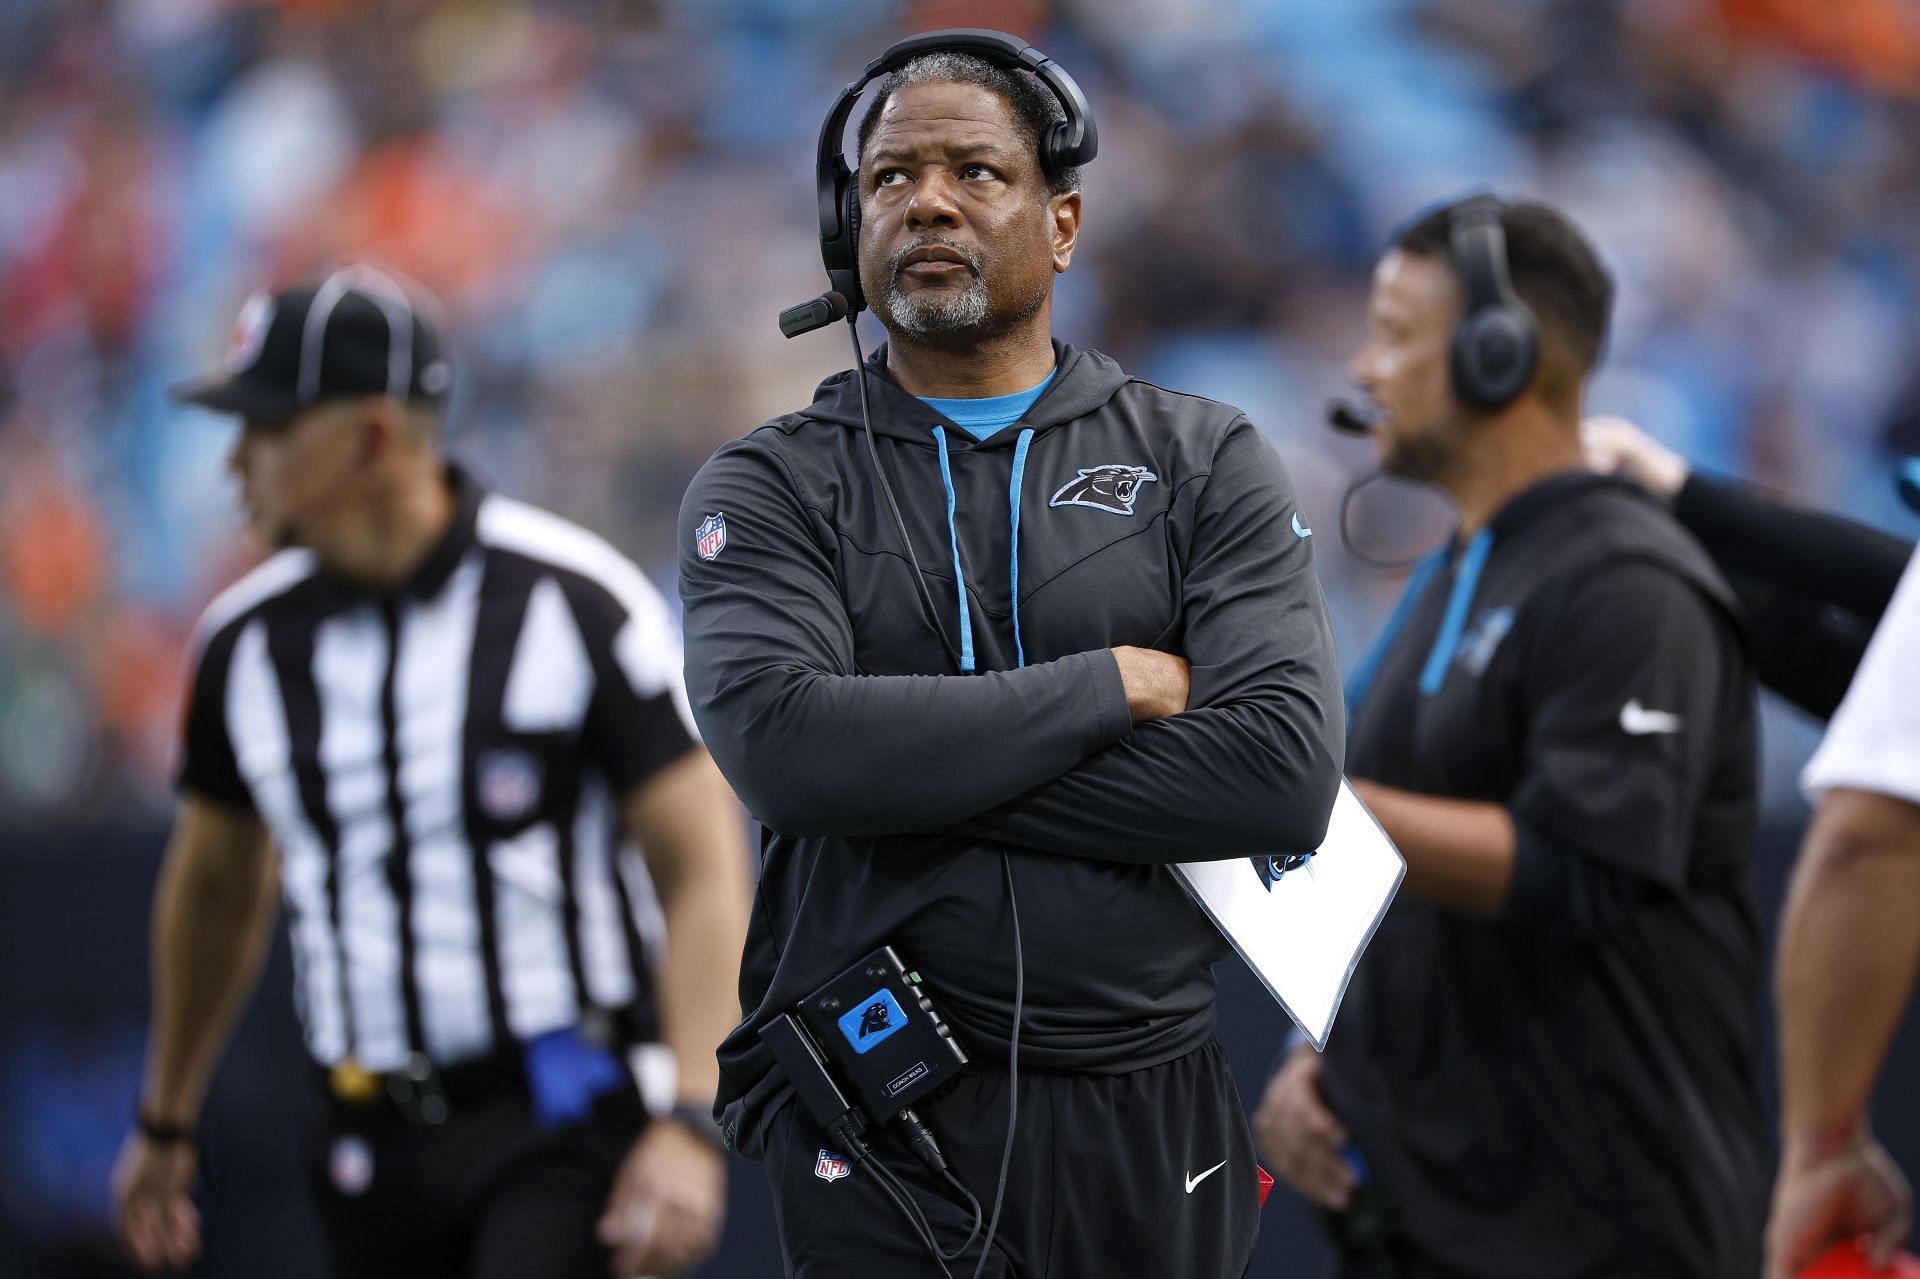 Carolina Panthers have been the unluckiest team